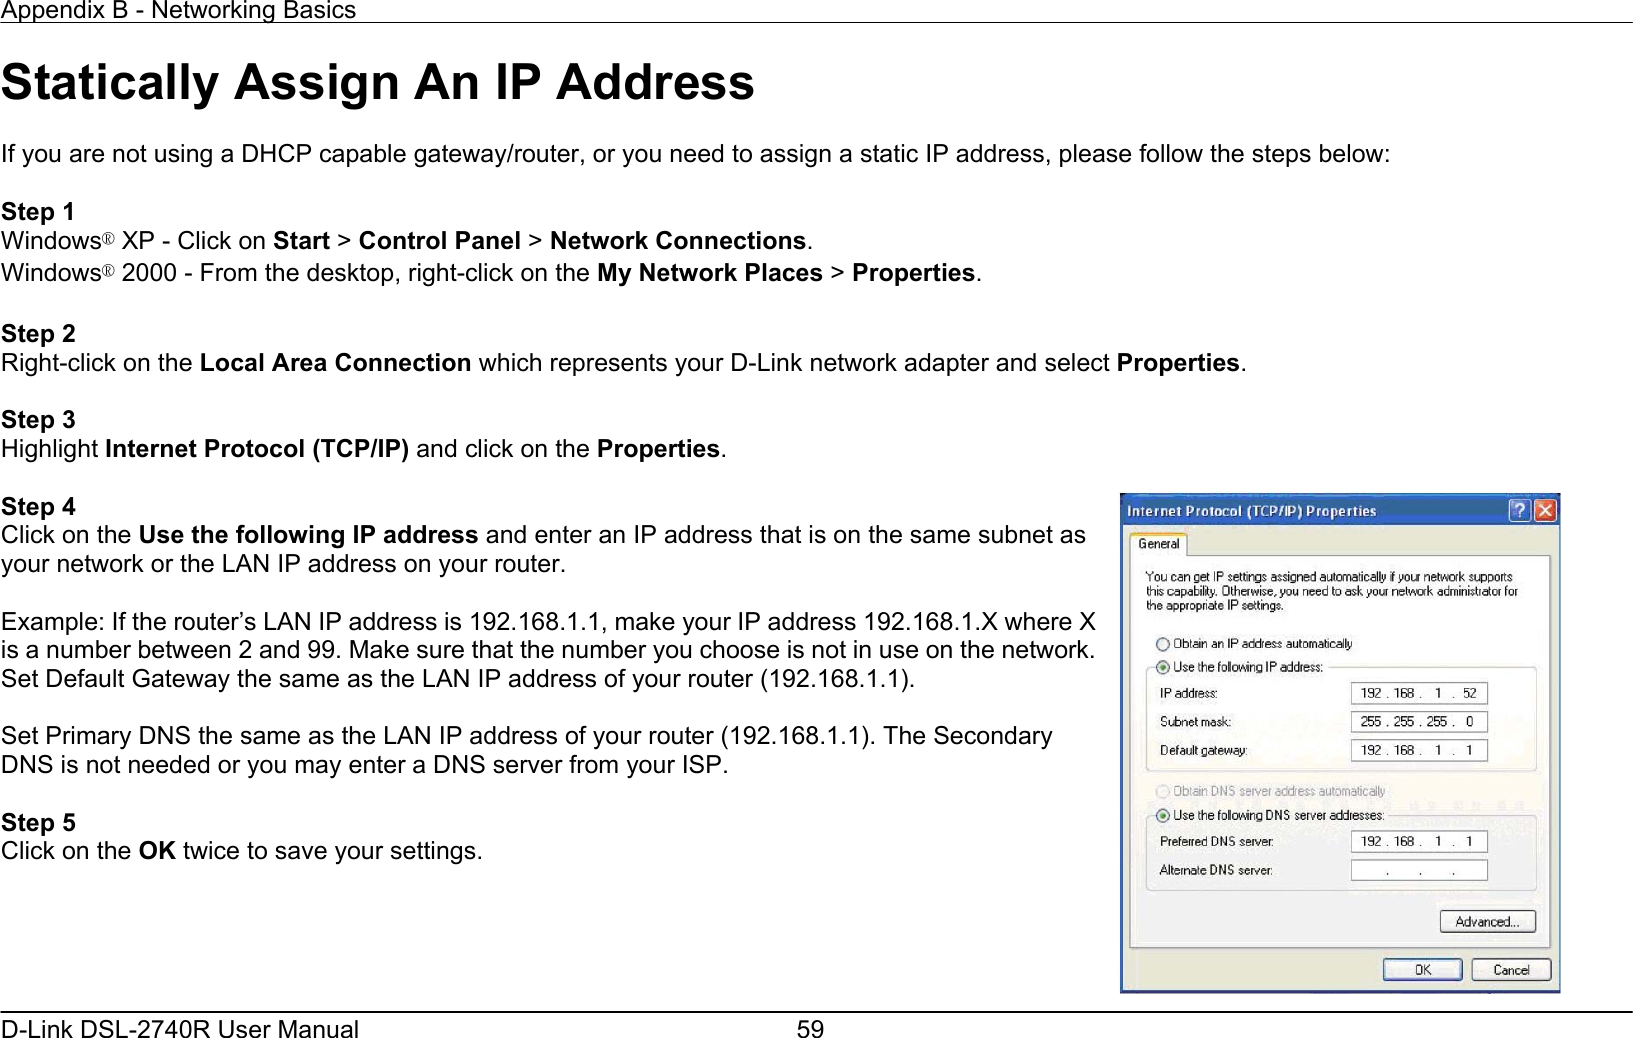 Appendix B - Networking Basics   D-Link DSL-2740R User Manual  59Statically Assign An IP Address  If you are not using a DHCP capable gateway/router, or you need to assign a static IP address, please follow the steps below:  Step 1 Windows® XP - Click on Start &gt; Control Panel &gt; Network Connections. Windows® 2000 - From the desktop, right-click on the My Network Places &gt; Properties.  Step 2 Right-click on the Local Area Connection which represents your D-Link network adapter and select Properties.  Step 3 Highlight Internet Protocol (TCP/IP) and click on the Properties.  Step 4 Click on the Use the following IP address and enter an IP address that is on the same subnet as your network or the LAN IP address on your router.  Example: If the router’s LAN IP address is 192.168.1.1, make your IP address 192.168.1.X where X is a number between 2 and 99. Make sure that the number you choose is not in use on the network. Set Default Gateway the same as the LAN IP address of your router (192.168.1.1).  Set Primary DNS the same as the LAN IP address of your router (192.168.1.1). The Secondary DNS is not needed or you may enter a DNS server from your ISP.  Step 5 Click on the OK twice to save your settings.   